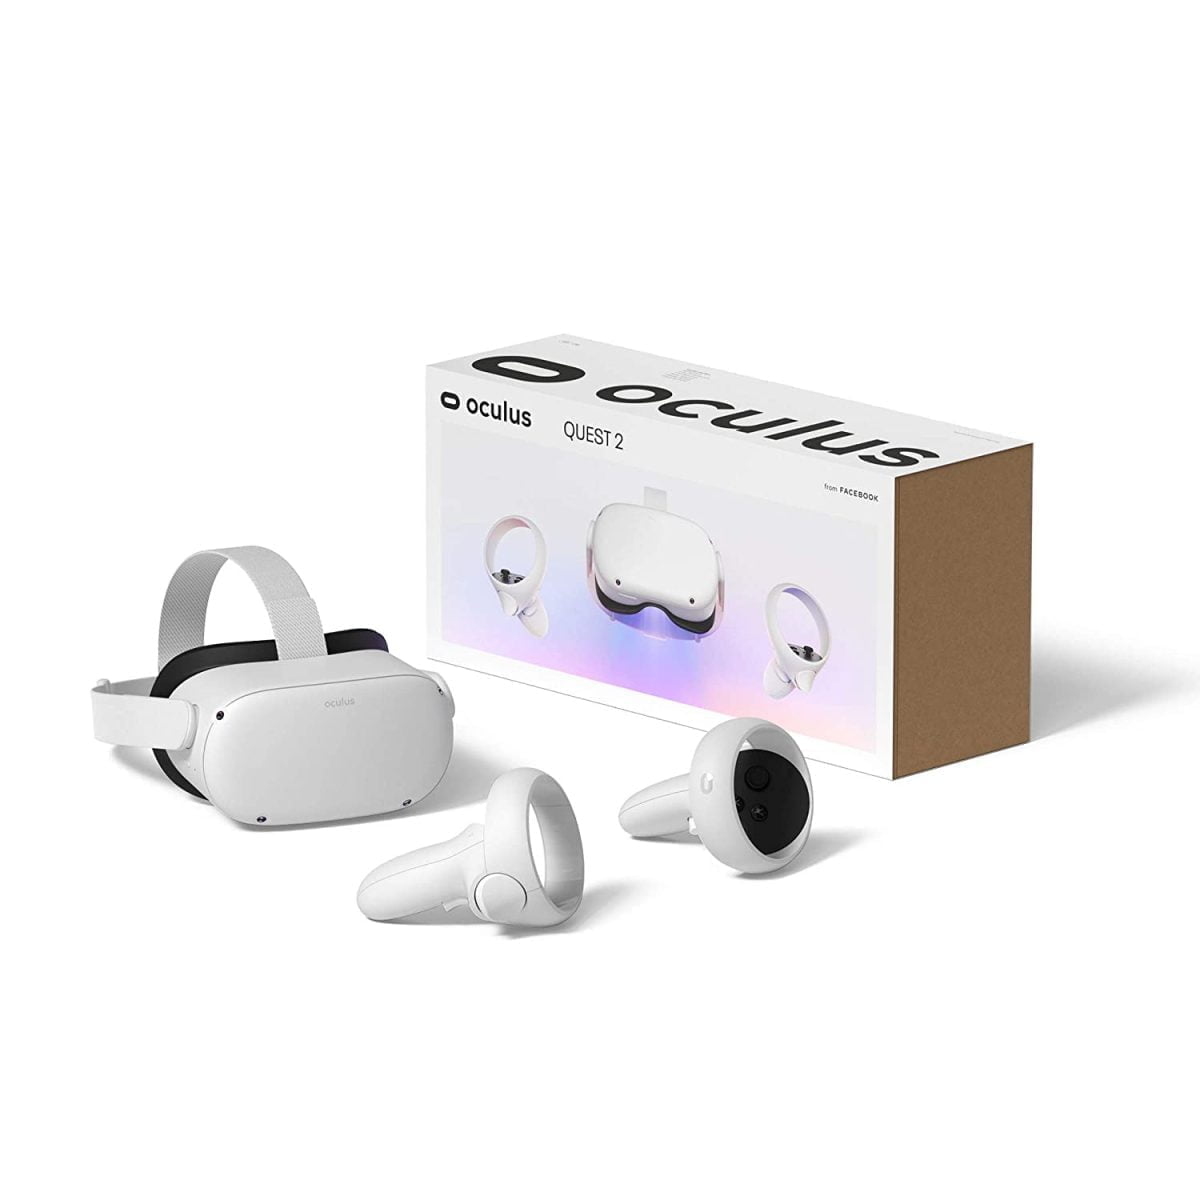 614Rzogtxl. Sl1500 Oculus &Lt;H1&Gt;Oculus Quest 2 256 Gb Advanced All-In-One Virtual Reality Headset&Lt;/H1&Gt; Https://Youtu.be/Atvgl9Wojsm &Lt;Ul Class=&Quot;A-Unordered-List A-Vertical A-Spacing-Mini&Quot;&Gt; &Lt;Li&Gt;&Lt;Span Class=&Quot;A-List-Item&Quot;&Gt;Voltage: 100-240 V&Lt;/Span&Gt;&Lt;/Li&Gt; &Lt;Li&Gt;&Lt;Span Class=&Quot;A-List-Item&Quot;&Gt;Next-Level Hardware - Make Every Move Count With A Blazing-Fast Processor And Our Highest-Resolution Display&Lt;/Span&Gt;&Lt;/Li&Gt; &Lt;Li&Gt;&Lt;Span Class=&Quot;A-List-Item&Quot;&Gt;All-In-One Gaming - With Backward Compatibility, You Can Explore New Titles And Old Favorites In The Expansive Quest Content Library&Lt;/Span&Gt;&Lt;/Li&Gt; &Lt;Li&Gt;&Lt;Span Class=&Quot;A-List-Item&Quot;&Gt;Immersive Entertainment - Get The Best Seat In The House To Live Concerts, Groundbreaking Films, Exclusive Events And More&Lt;/Span&Gt;&Lt;/Li&Gt; &Lt;Li&Gt;&Lt;Span Class=&Quot;A-List-Item&Quot;&Gt;Easy Setup - Just Open The Box, Set Up With The Smartphone App And Jump Into Vr. No Pc Or Console Needed. Requires Wireless Internet Access And The Oculus App (Free Download) To Set Up Device Premium Display - Catch Every Detail With A Stunning Display That Features 50% More Pixels Than The Original Quest Ultimate Control - Redesigned Oculus Touch Controllers Transport Your Movements Directly Into Vr With Intuitive Controls Pc Vr Compatible - Step Into Incredible Oculus Rift Titles By Connecting An Oculus Link Cable To A Compatible Gaming Pc. Oculus Link Cable Sold Separately 3D Cinematic Sound - Hear In All Directions With Built-In Speakers That Deliver Cinematic 3D Positional Audio&Lt;/Span&Gt;&Lt;/Li&Gt; &Lt;/Ul&Gt; &Nbsp; Oculus Quest 2 Oculus Quest 2 256 Gb - Advanced All-In-One Virtual Reality Headset